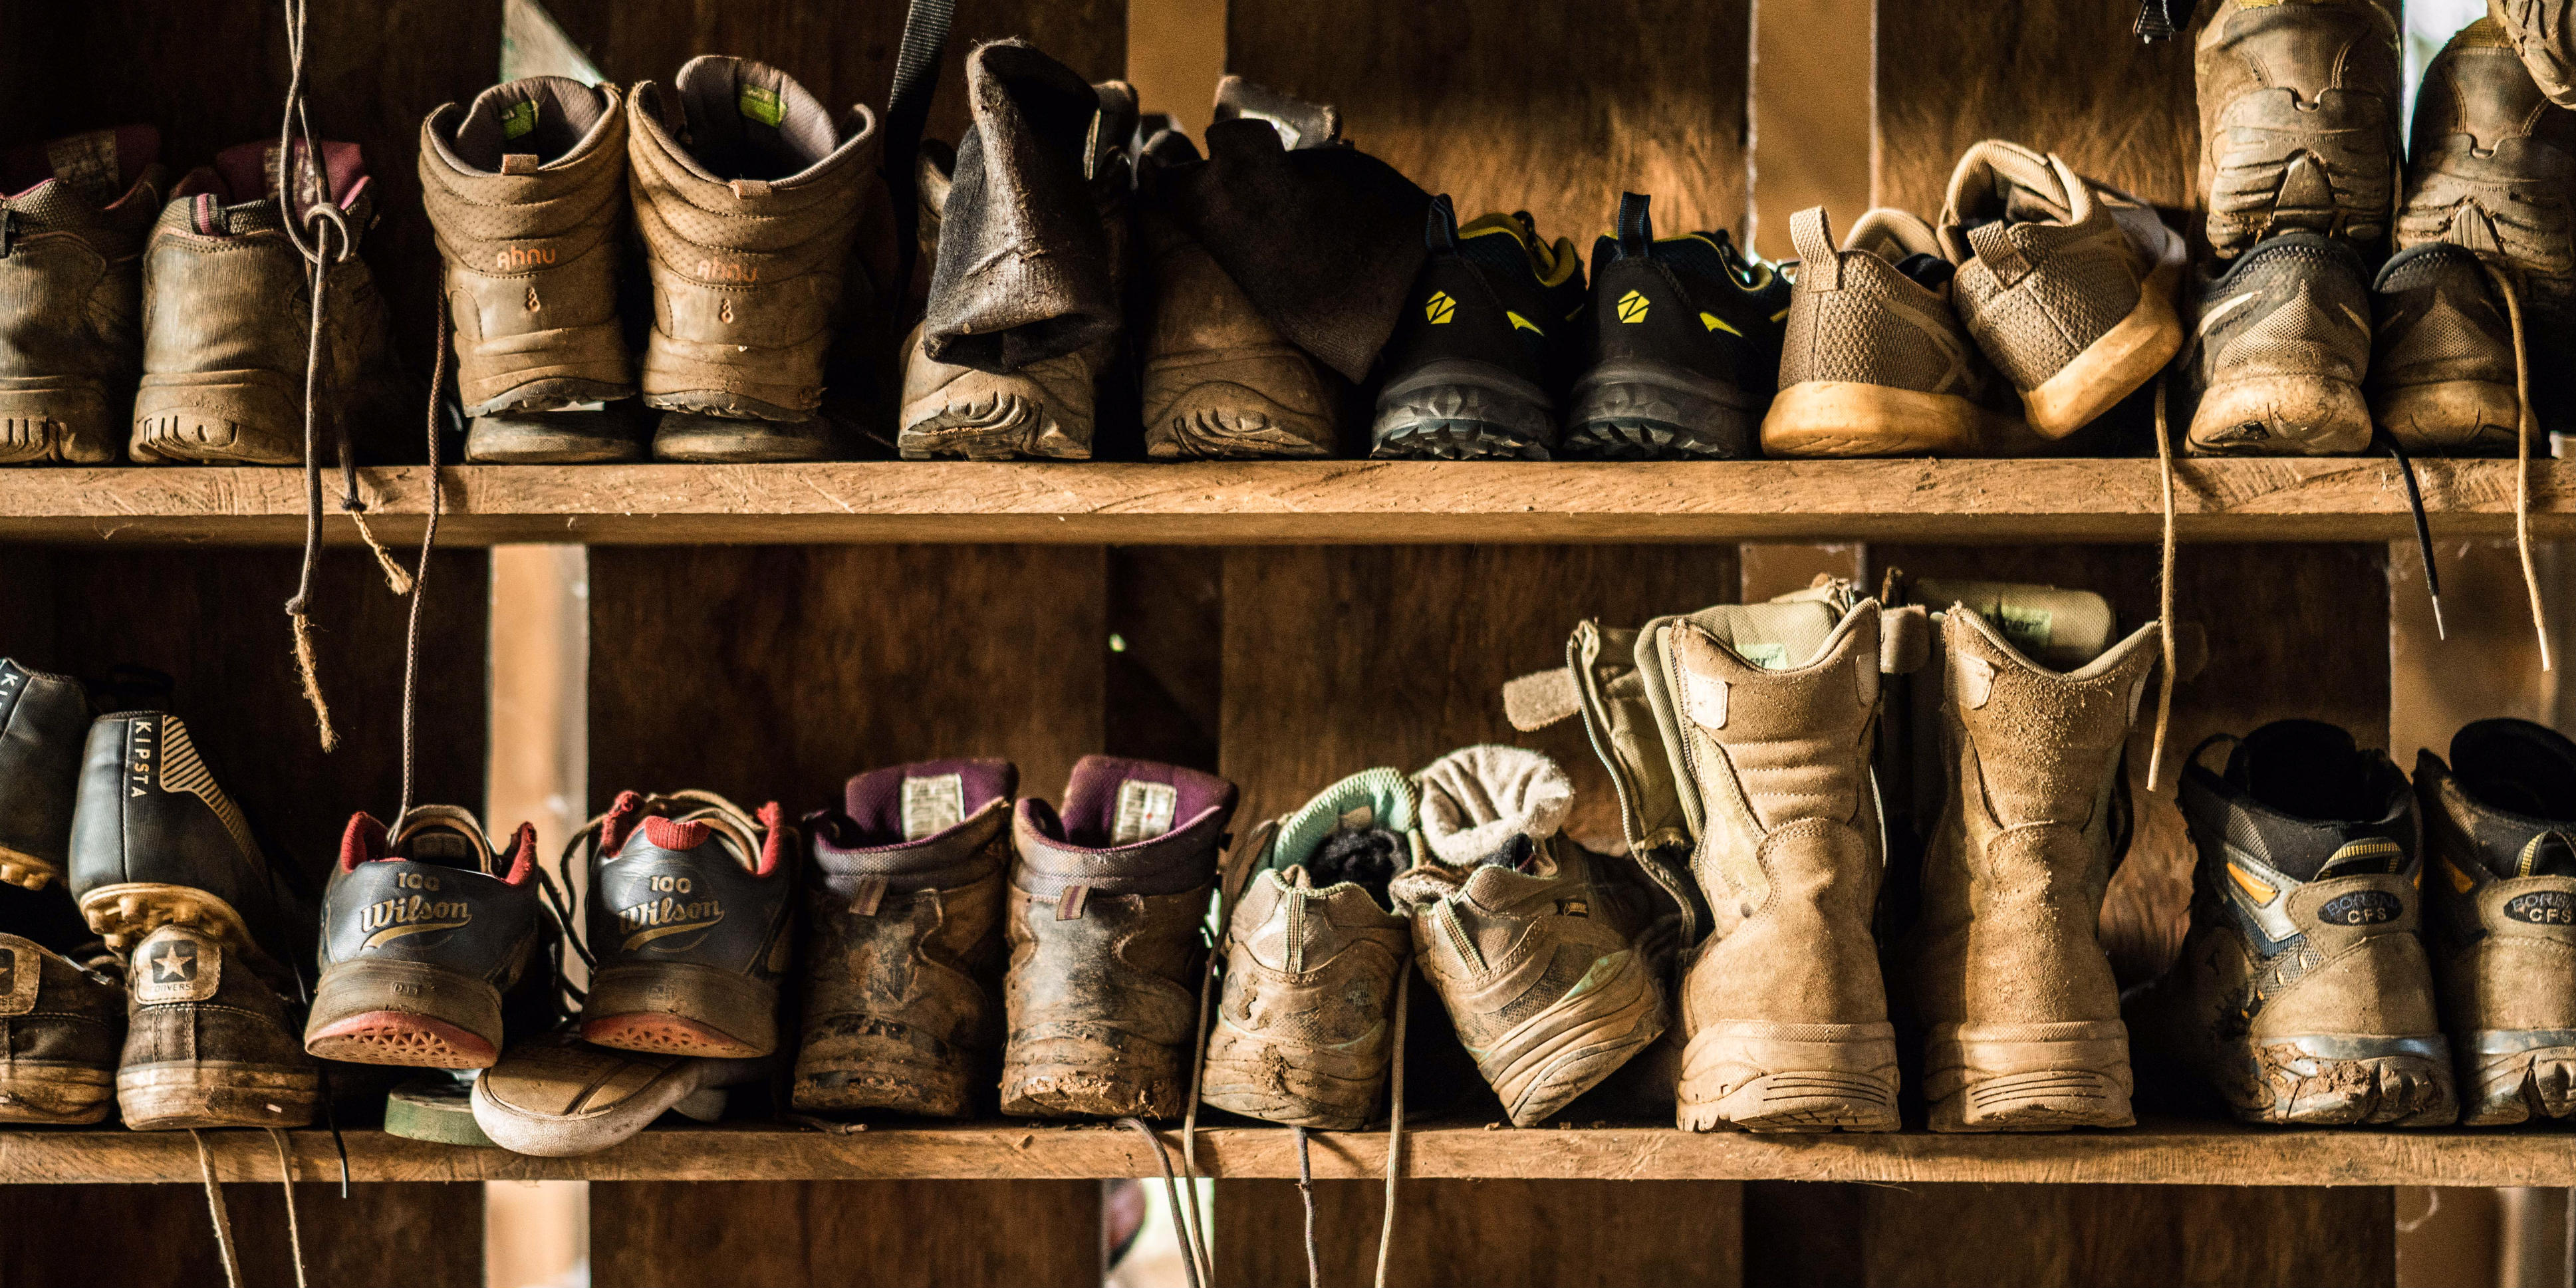 Your gap year travel checklist should include packing a comfortable pair of shoes, or hiking boots.